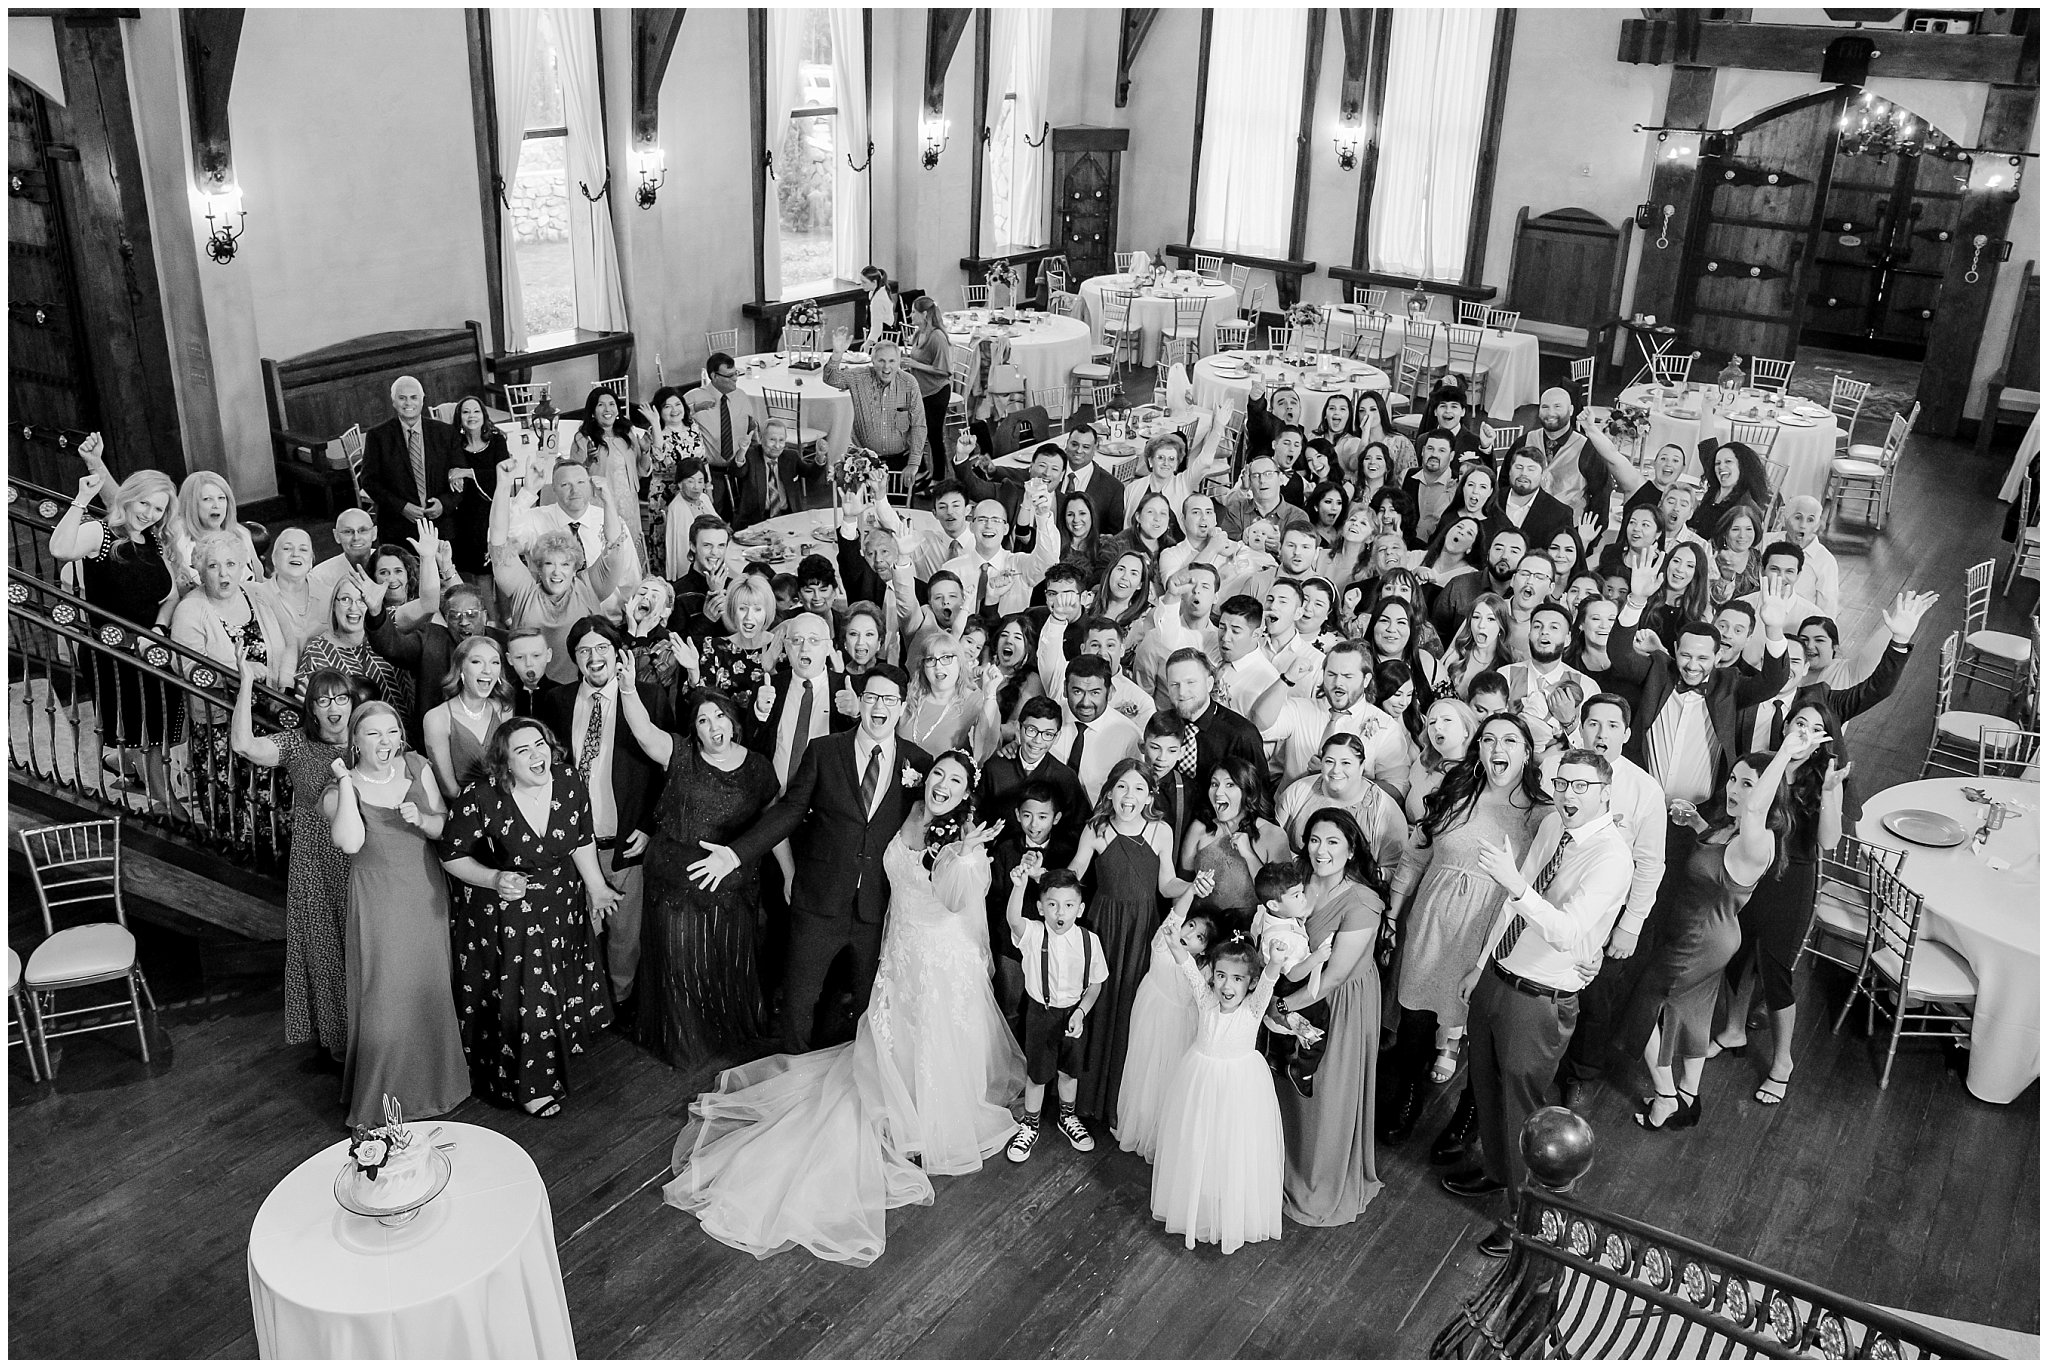 Giant group photo during reception inside castle | Wadley Farms Spring Castle Wedding